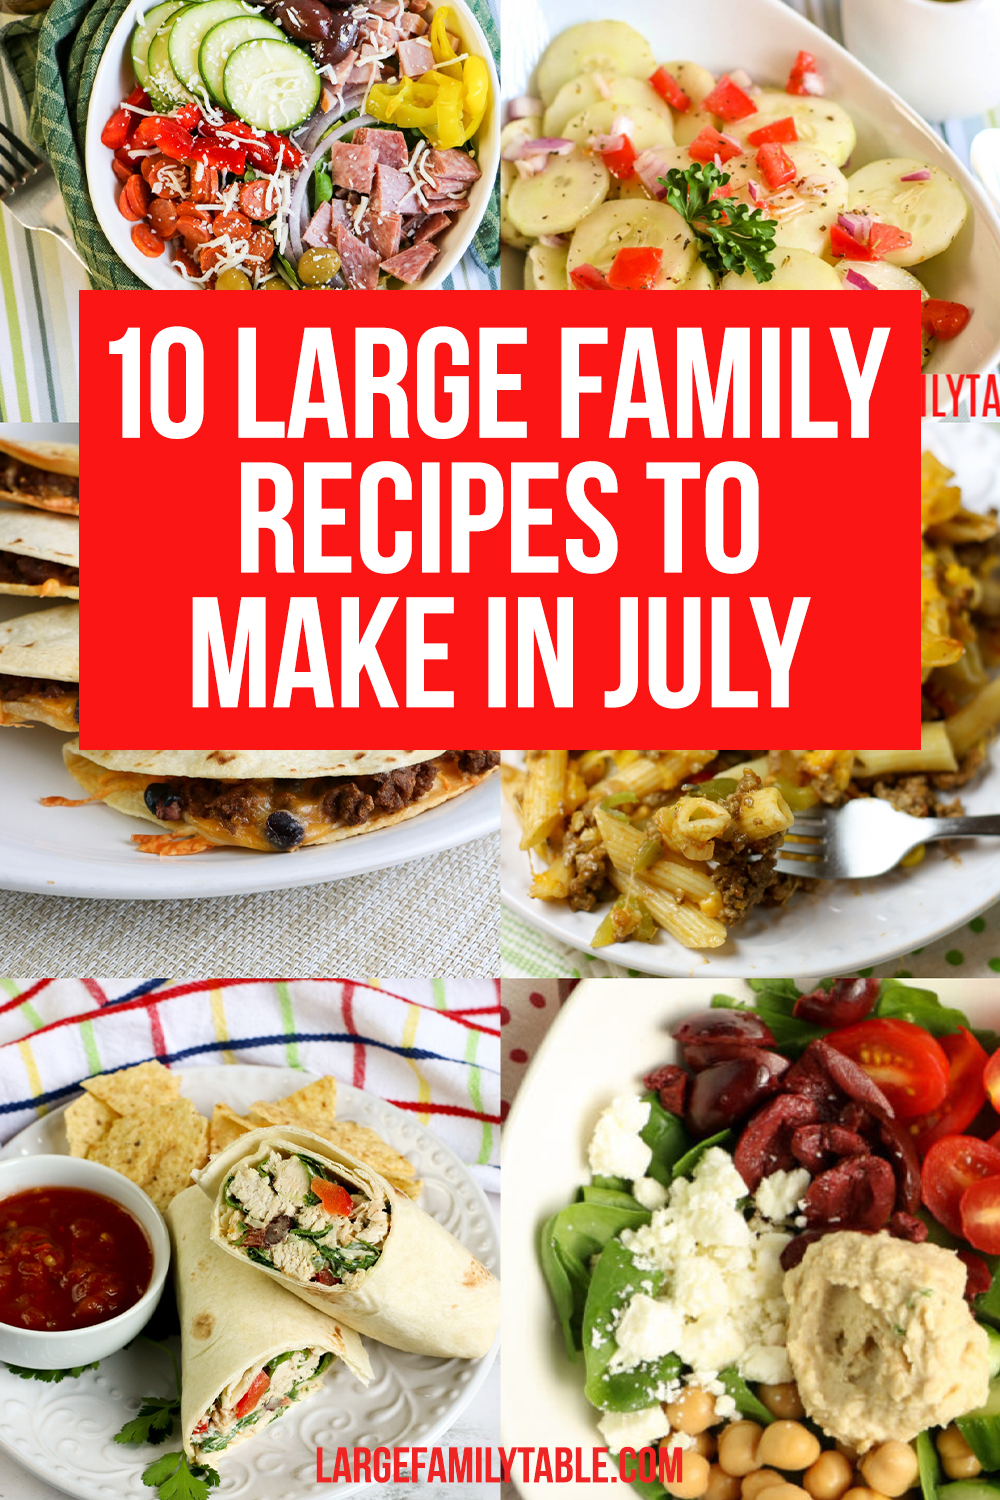 10-Large-Family-Recipes-to-Make-in-July